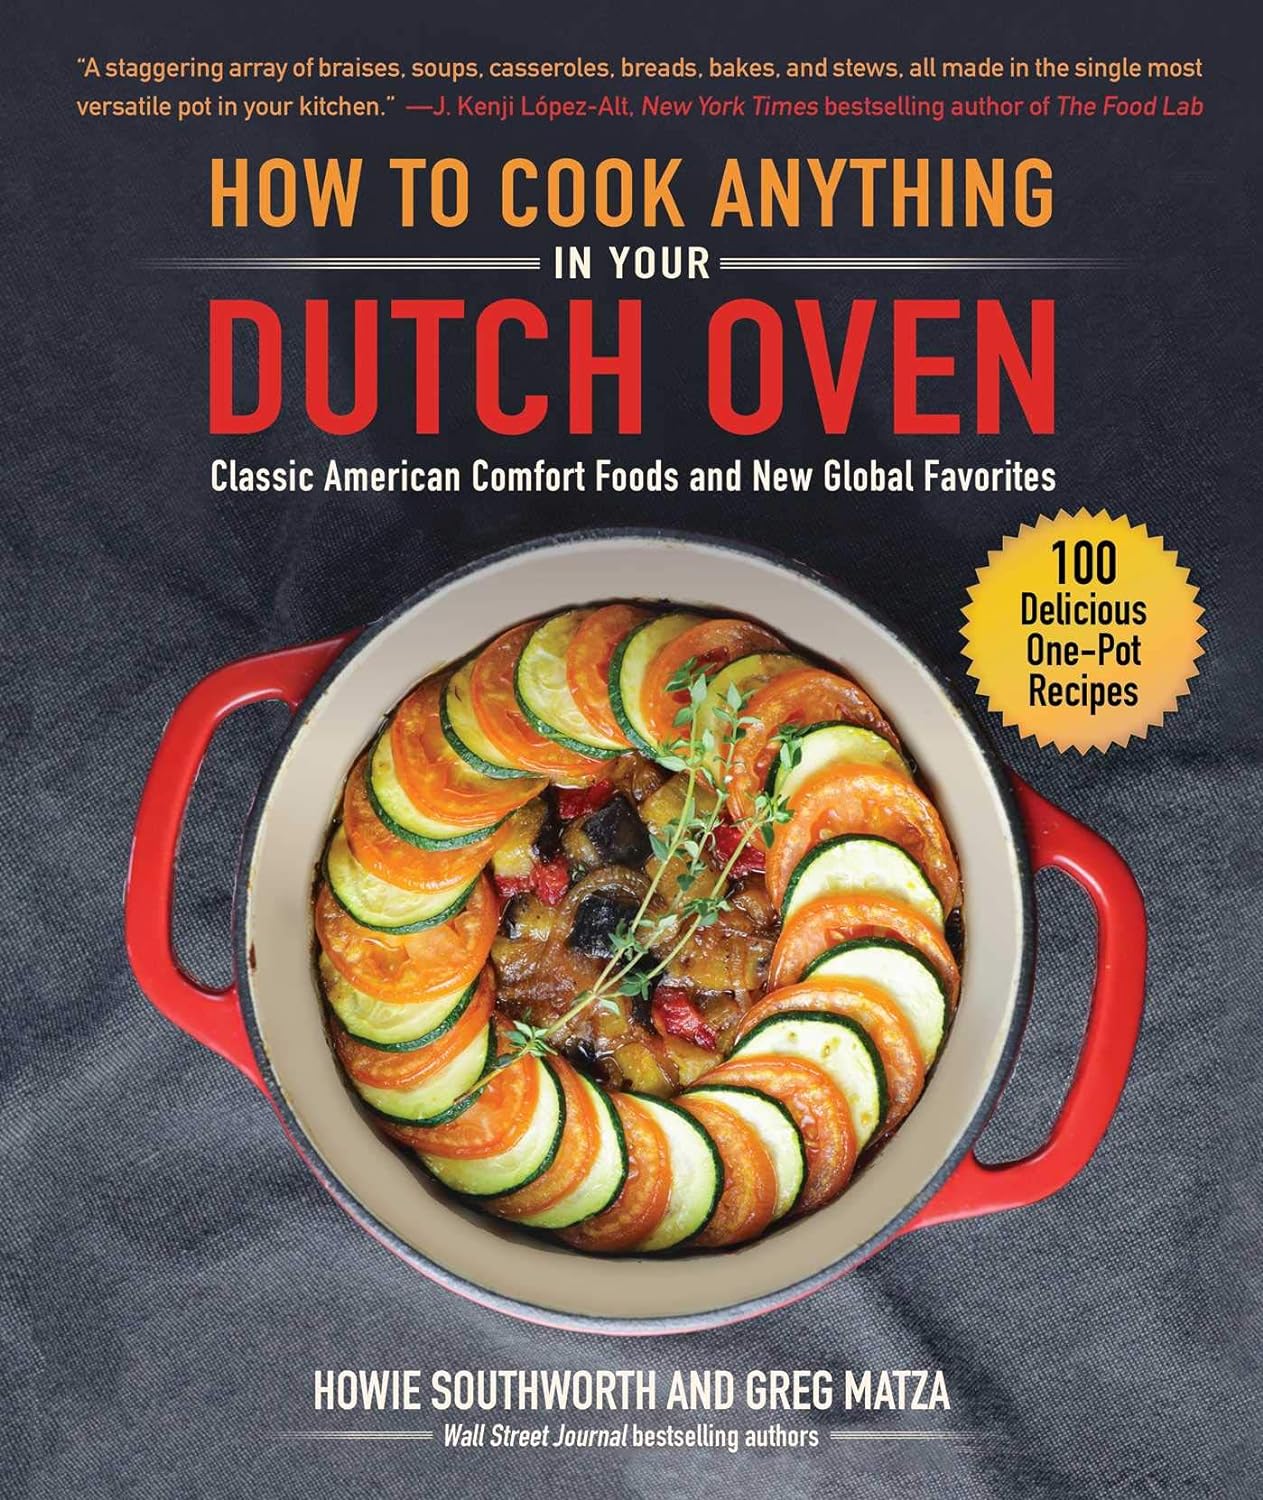 How to Cook Anything in Your Dutch Oven: Classic American Comfort Foods and New Global Favorites (Howie Southworth, Greg Matza)